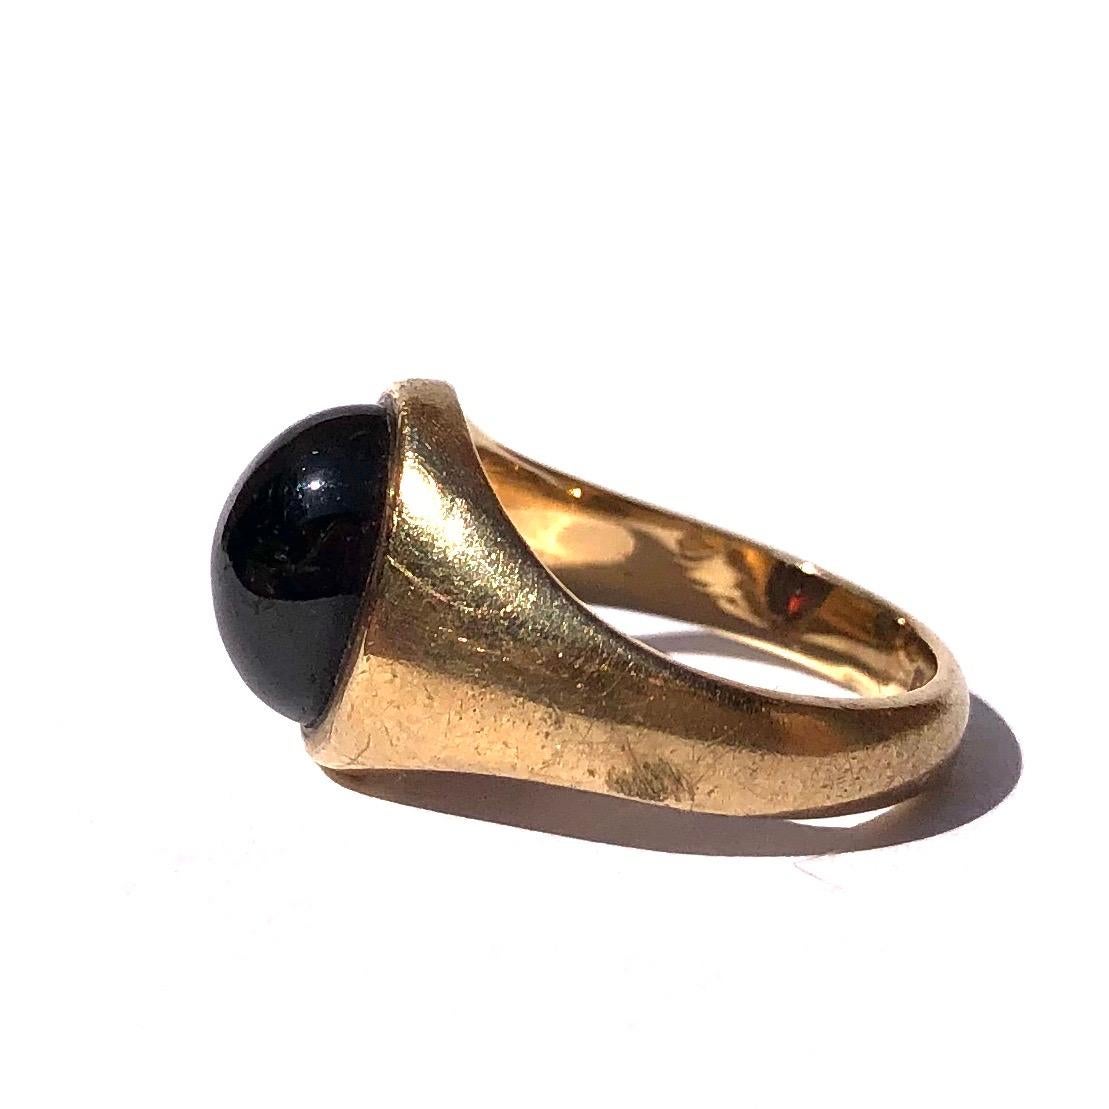 Sat proud upon a gorgeous glossy 9ct yellow gold band is an equally glossy garnet cabochon stone. The stone is slightly oval and nearly spans the whole width of this ring. Made in Birmingham, England.

Ring Size: G or 3 1/3 
Band Width At Widest: